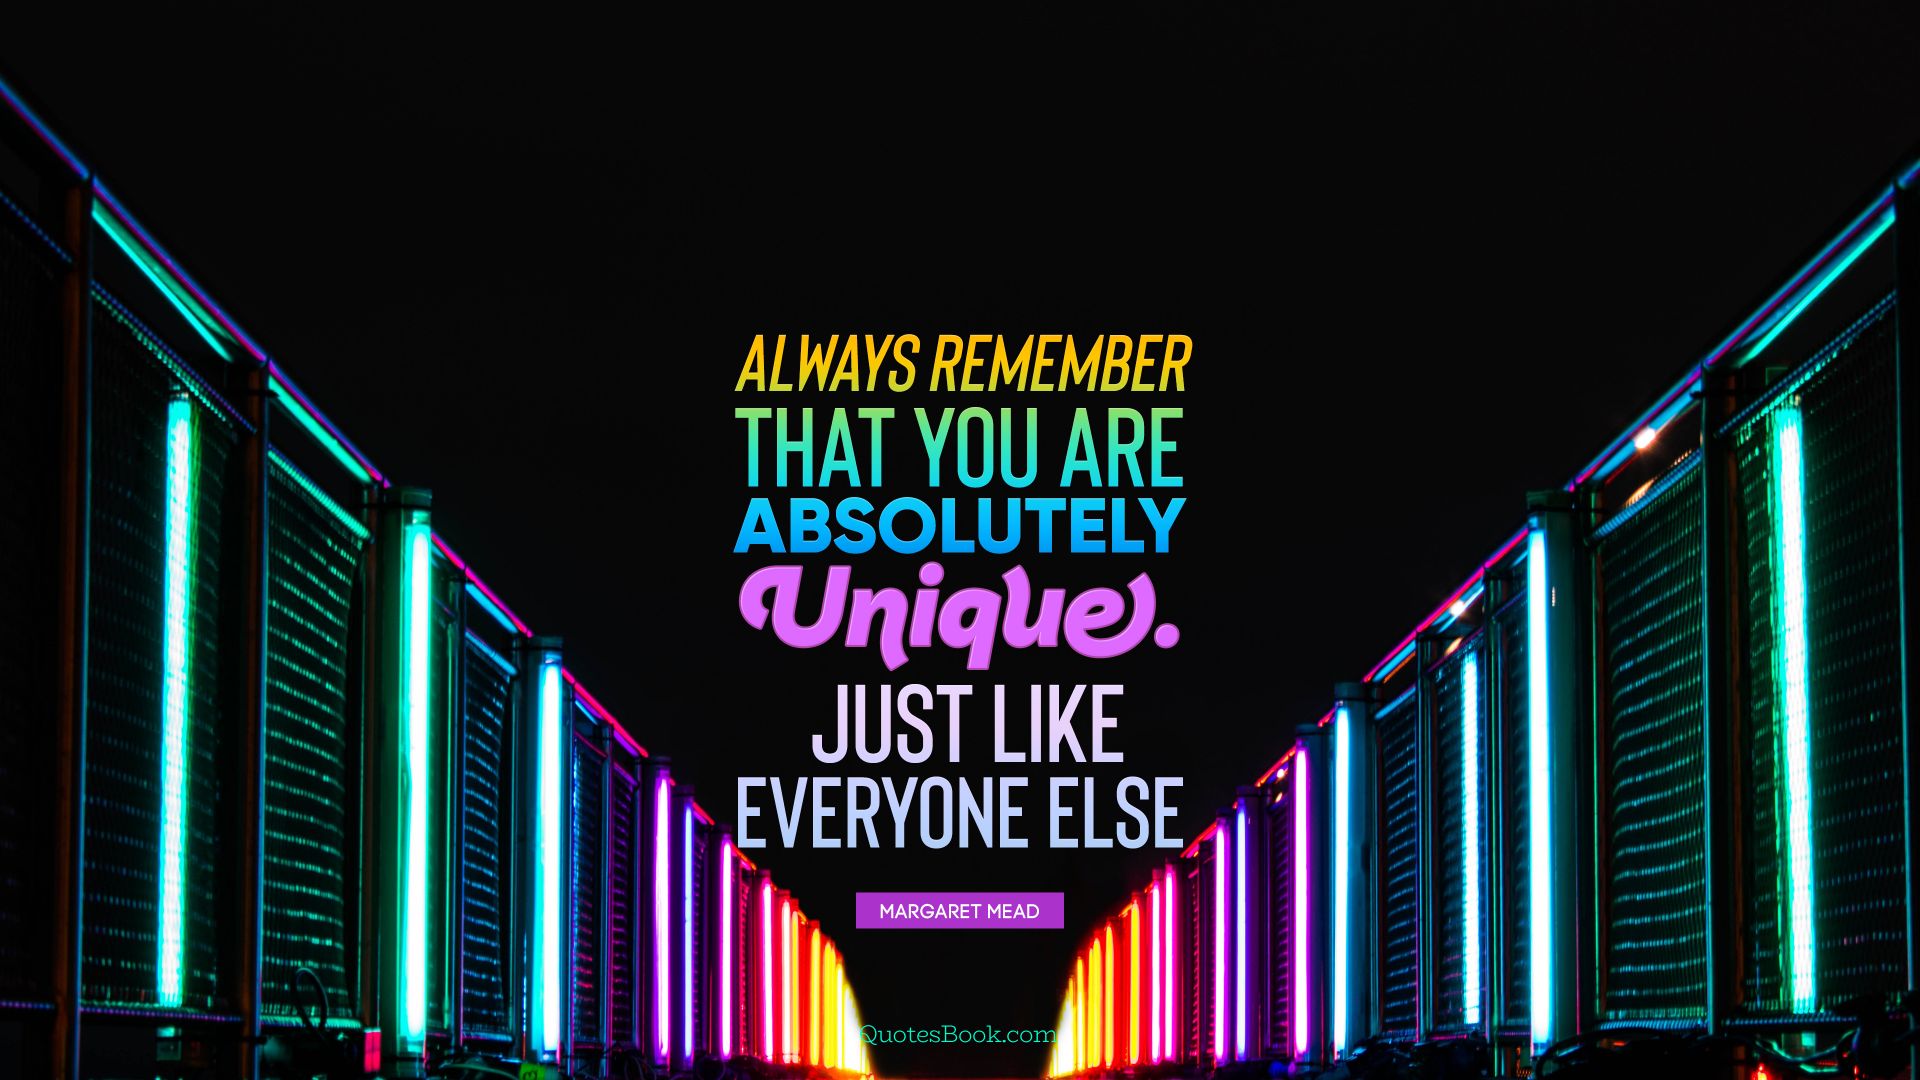 Always remember that you are absolutely unique. Just like everyone else. - Quote by Margaret Mead